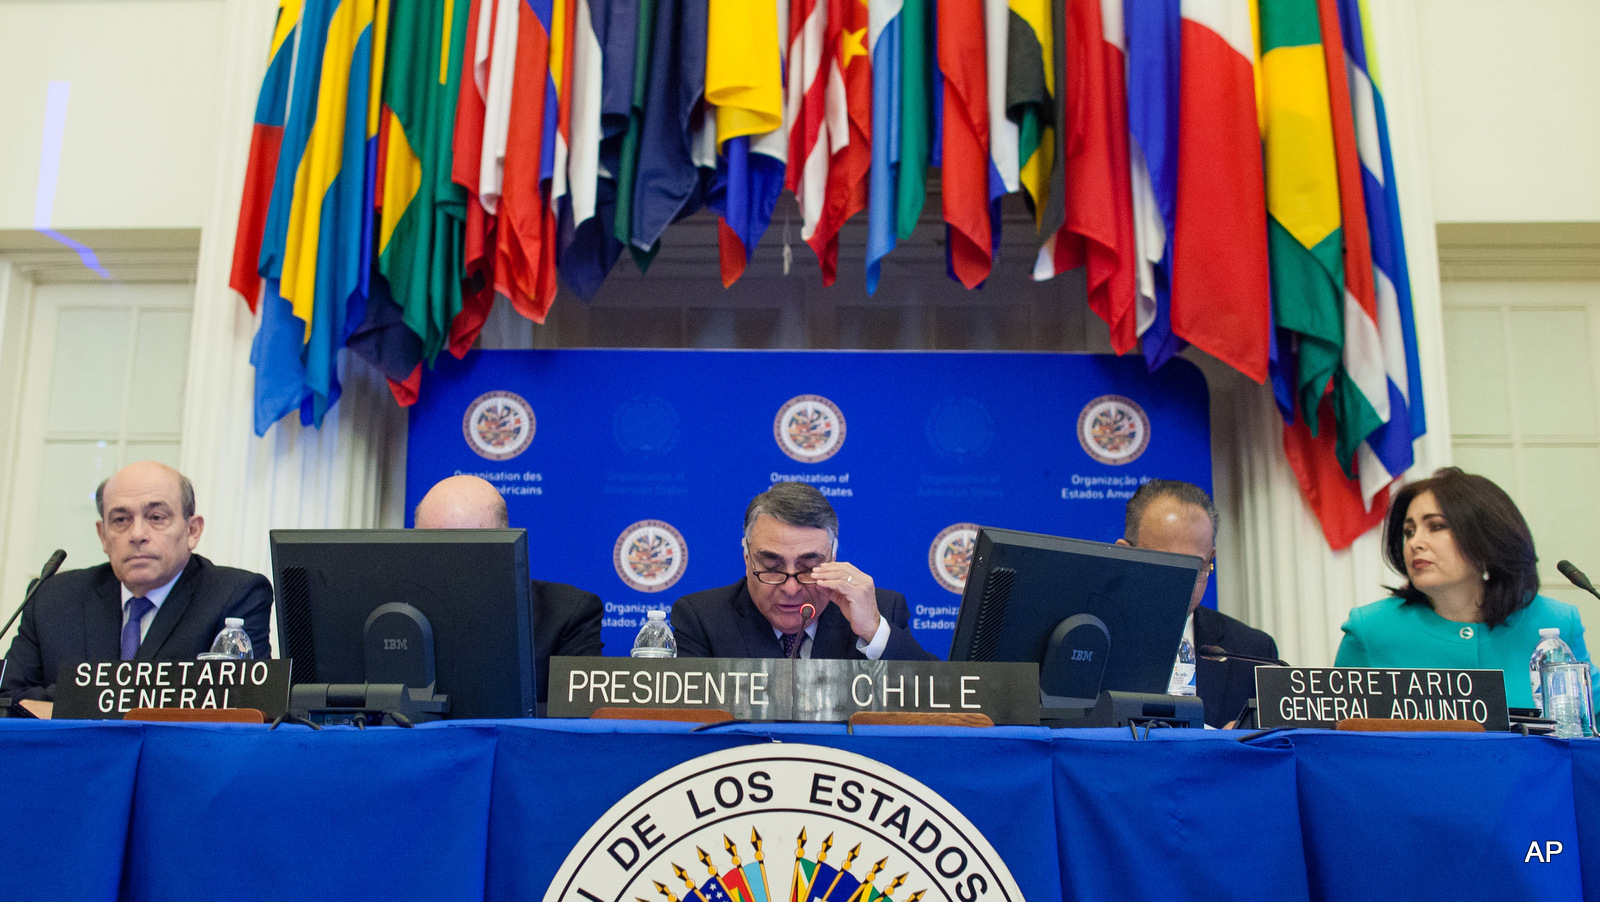 Chilean Vice-Minister of Foreign Affairs Edgardo Riveros speaks at the beginning of The Forty-Ninth Special Session of the General Assembly of the Organization of American States in the Hall of the Americas of the headquarters of the Organization of American States in Washington, Wednesday, March 18, 2015. 